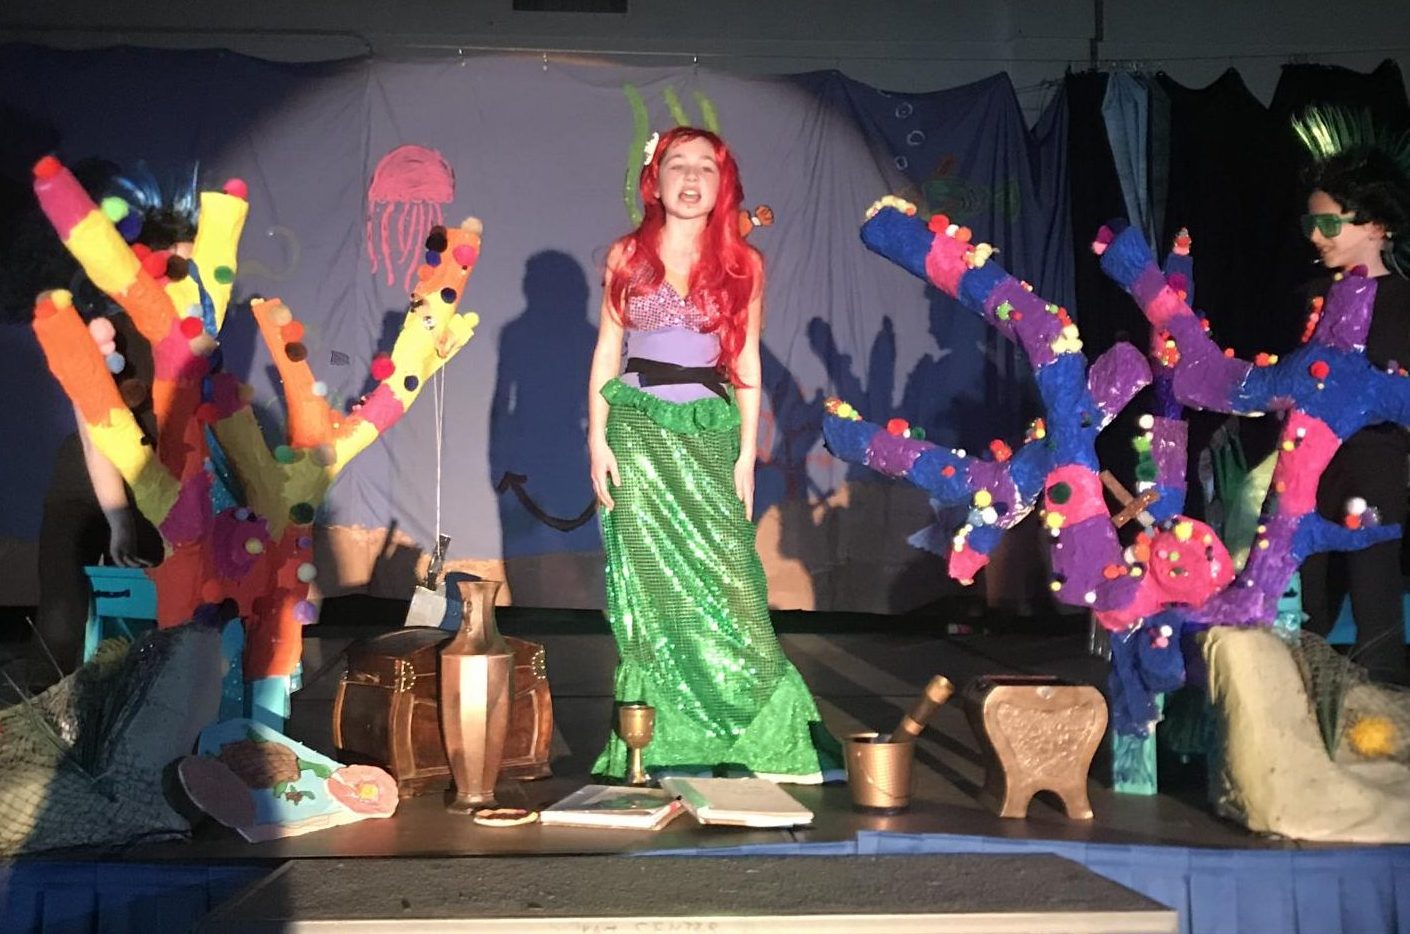 Lead role Jillian Willwerth sings “Part of Your World” surrounded by props crafted by the Scenery Crew. The song is one of many Willwerth’s voice is featured in.